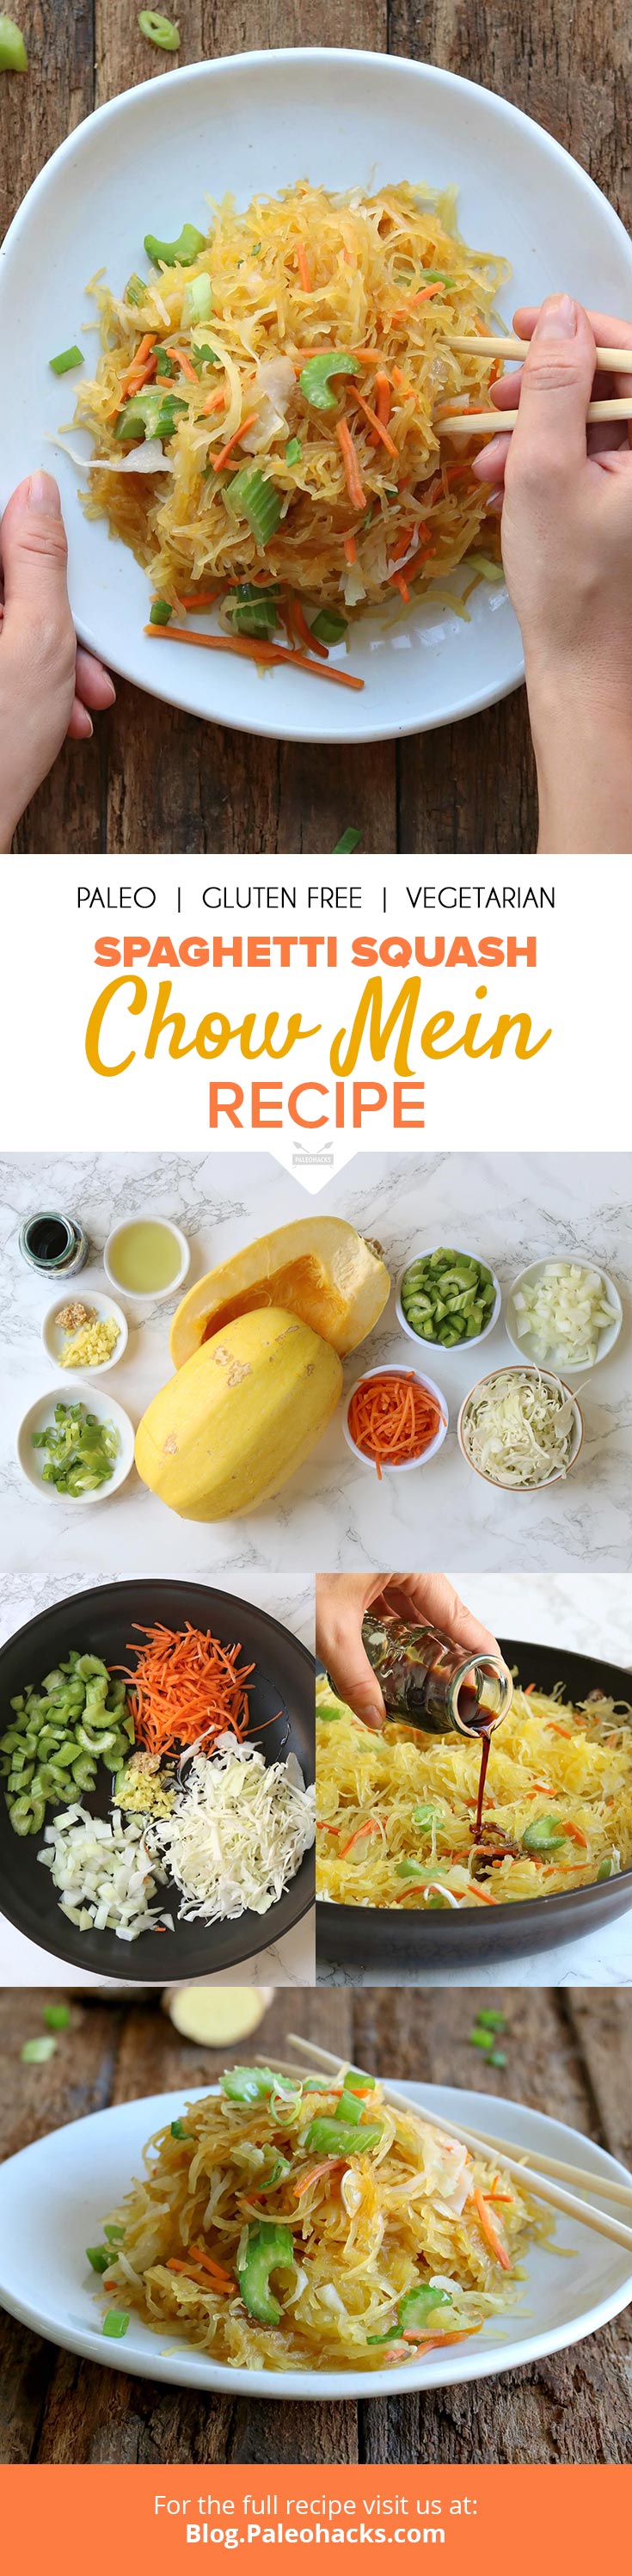 Craving a carton of takeout noodles? This spaghetti squash version of chow mein will deliver serious flavor without any MSG.